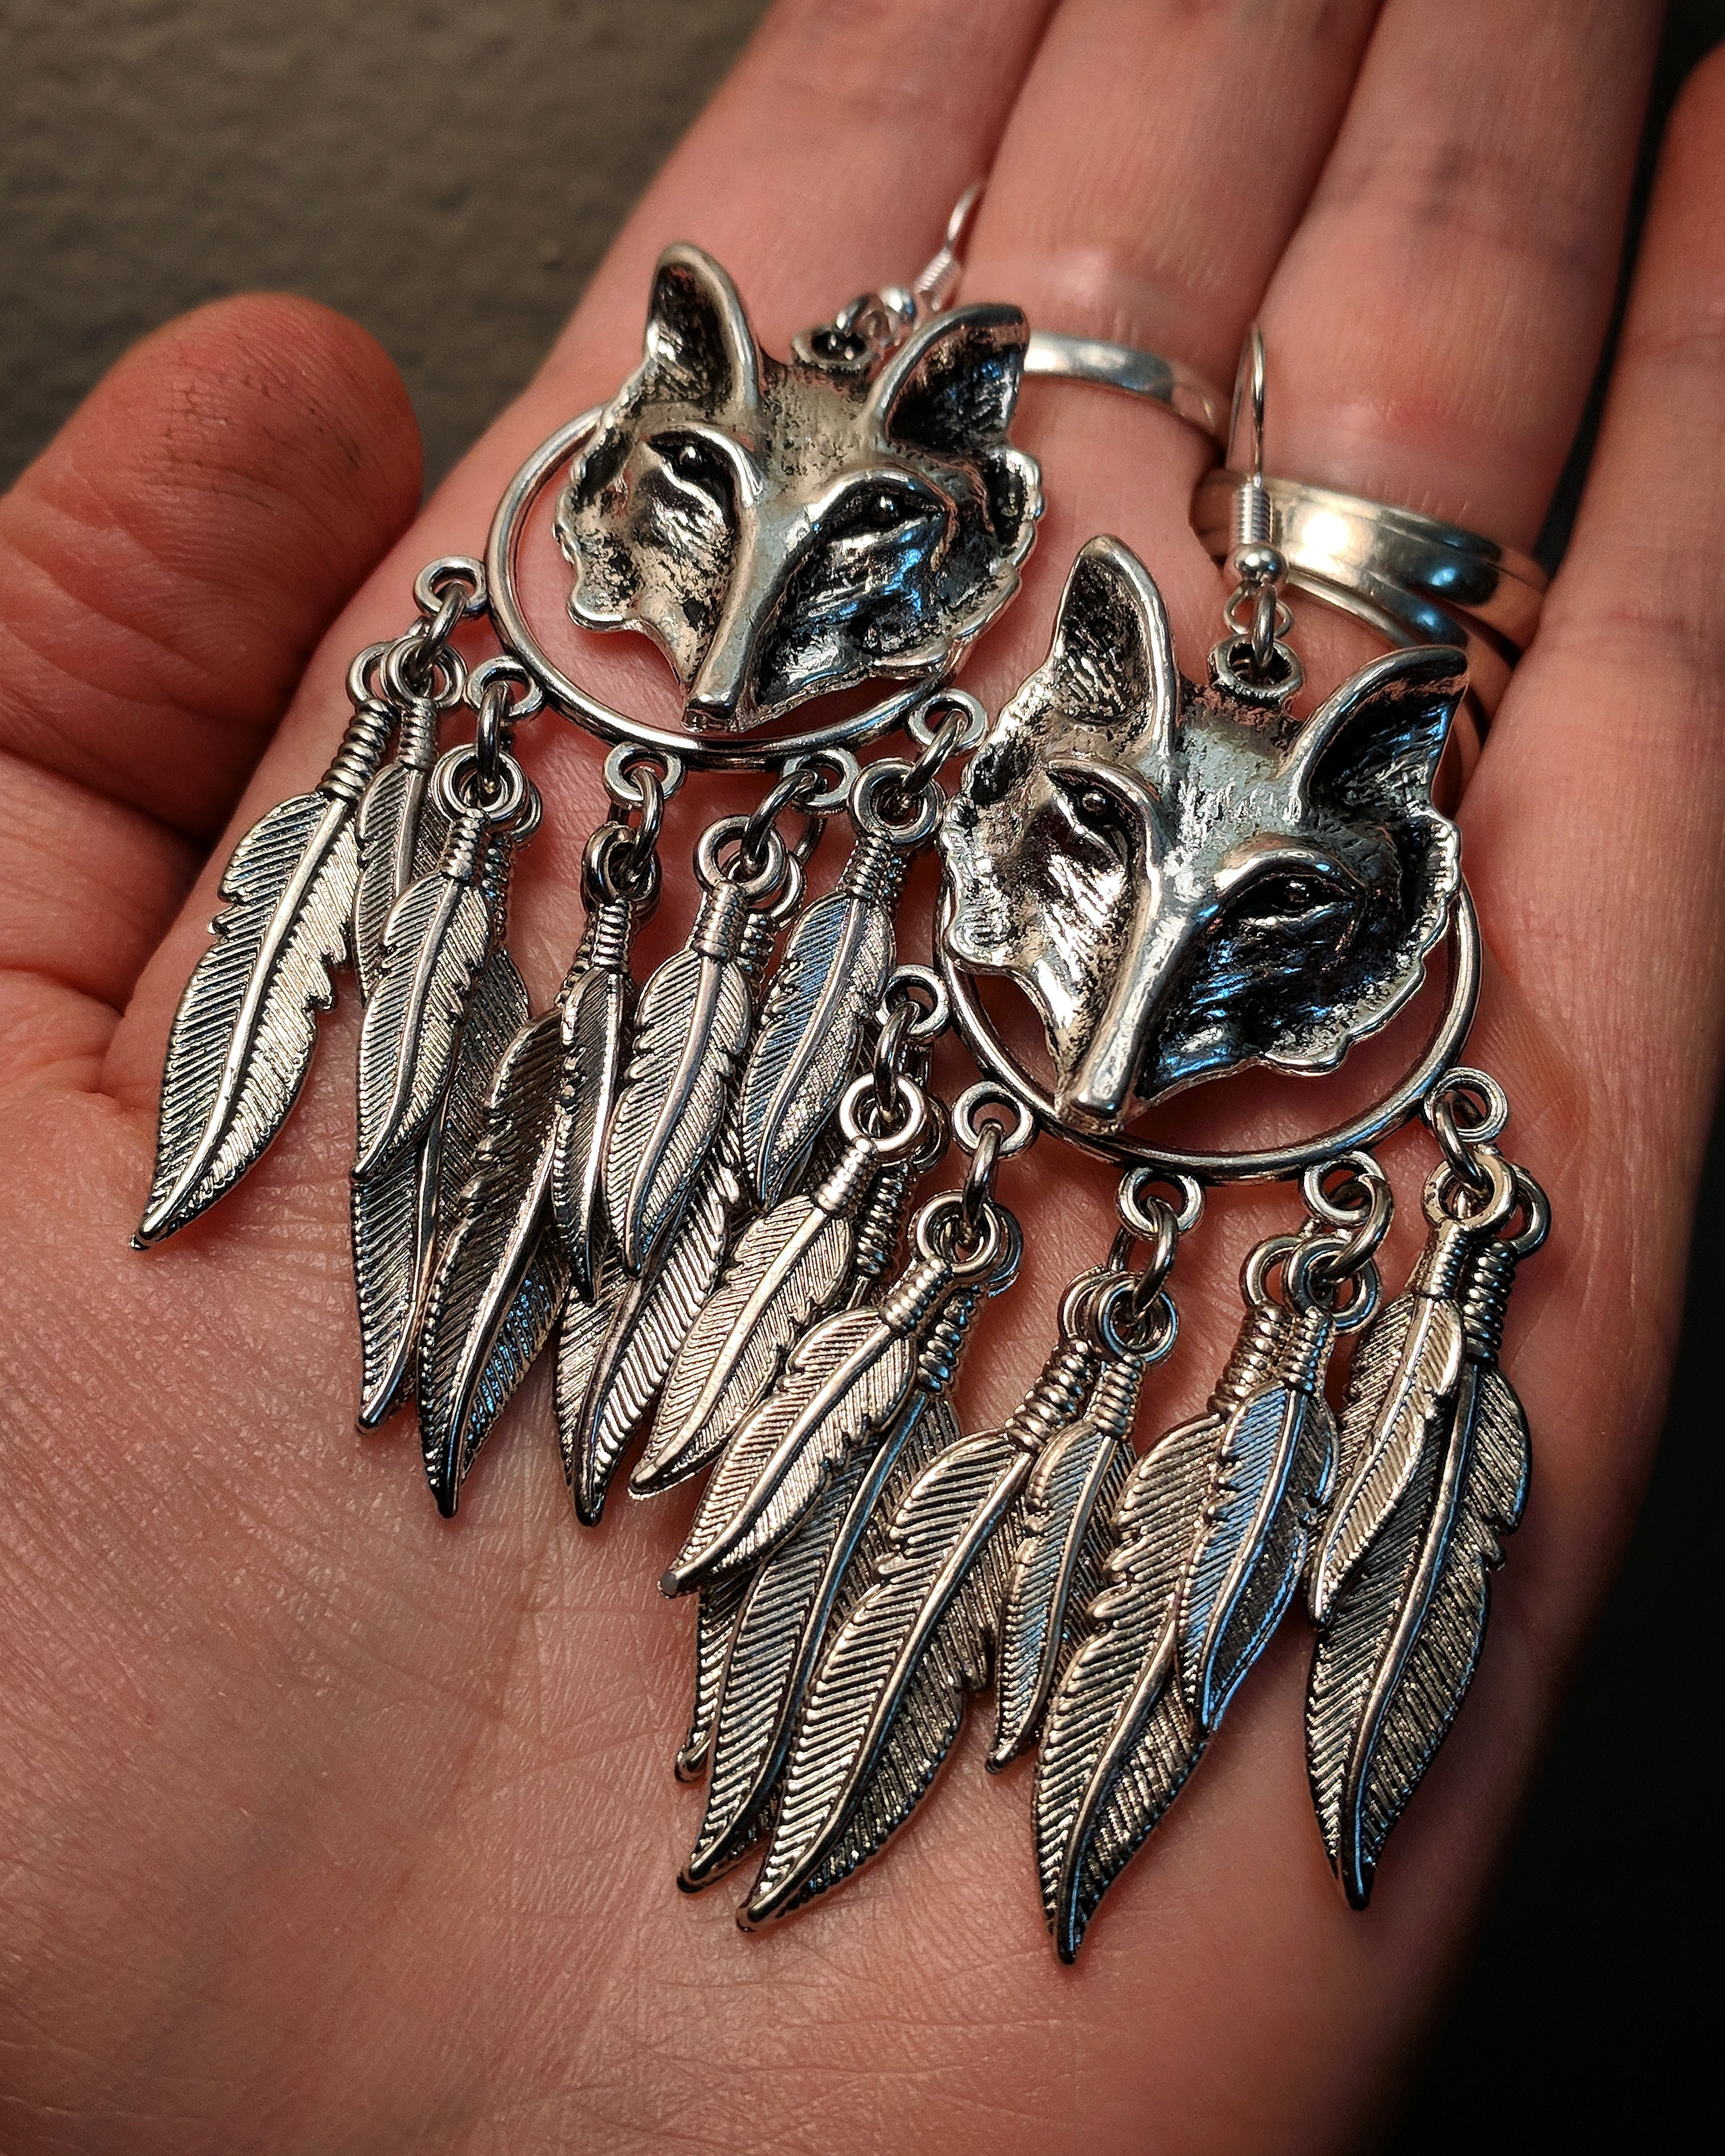 Wolf Fox Dreamcatcher Feather Mixed Metal With Stainless Steel Ear Hooks Statement Earrings